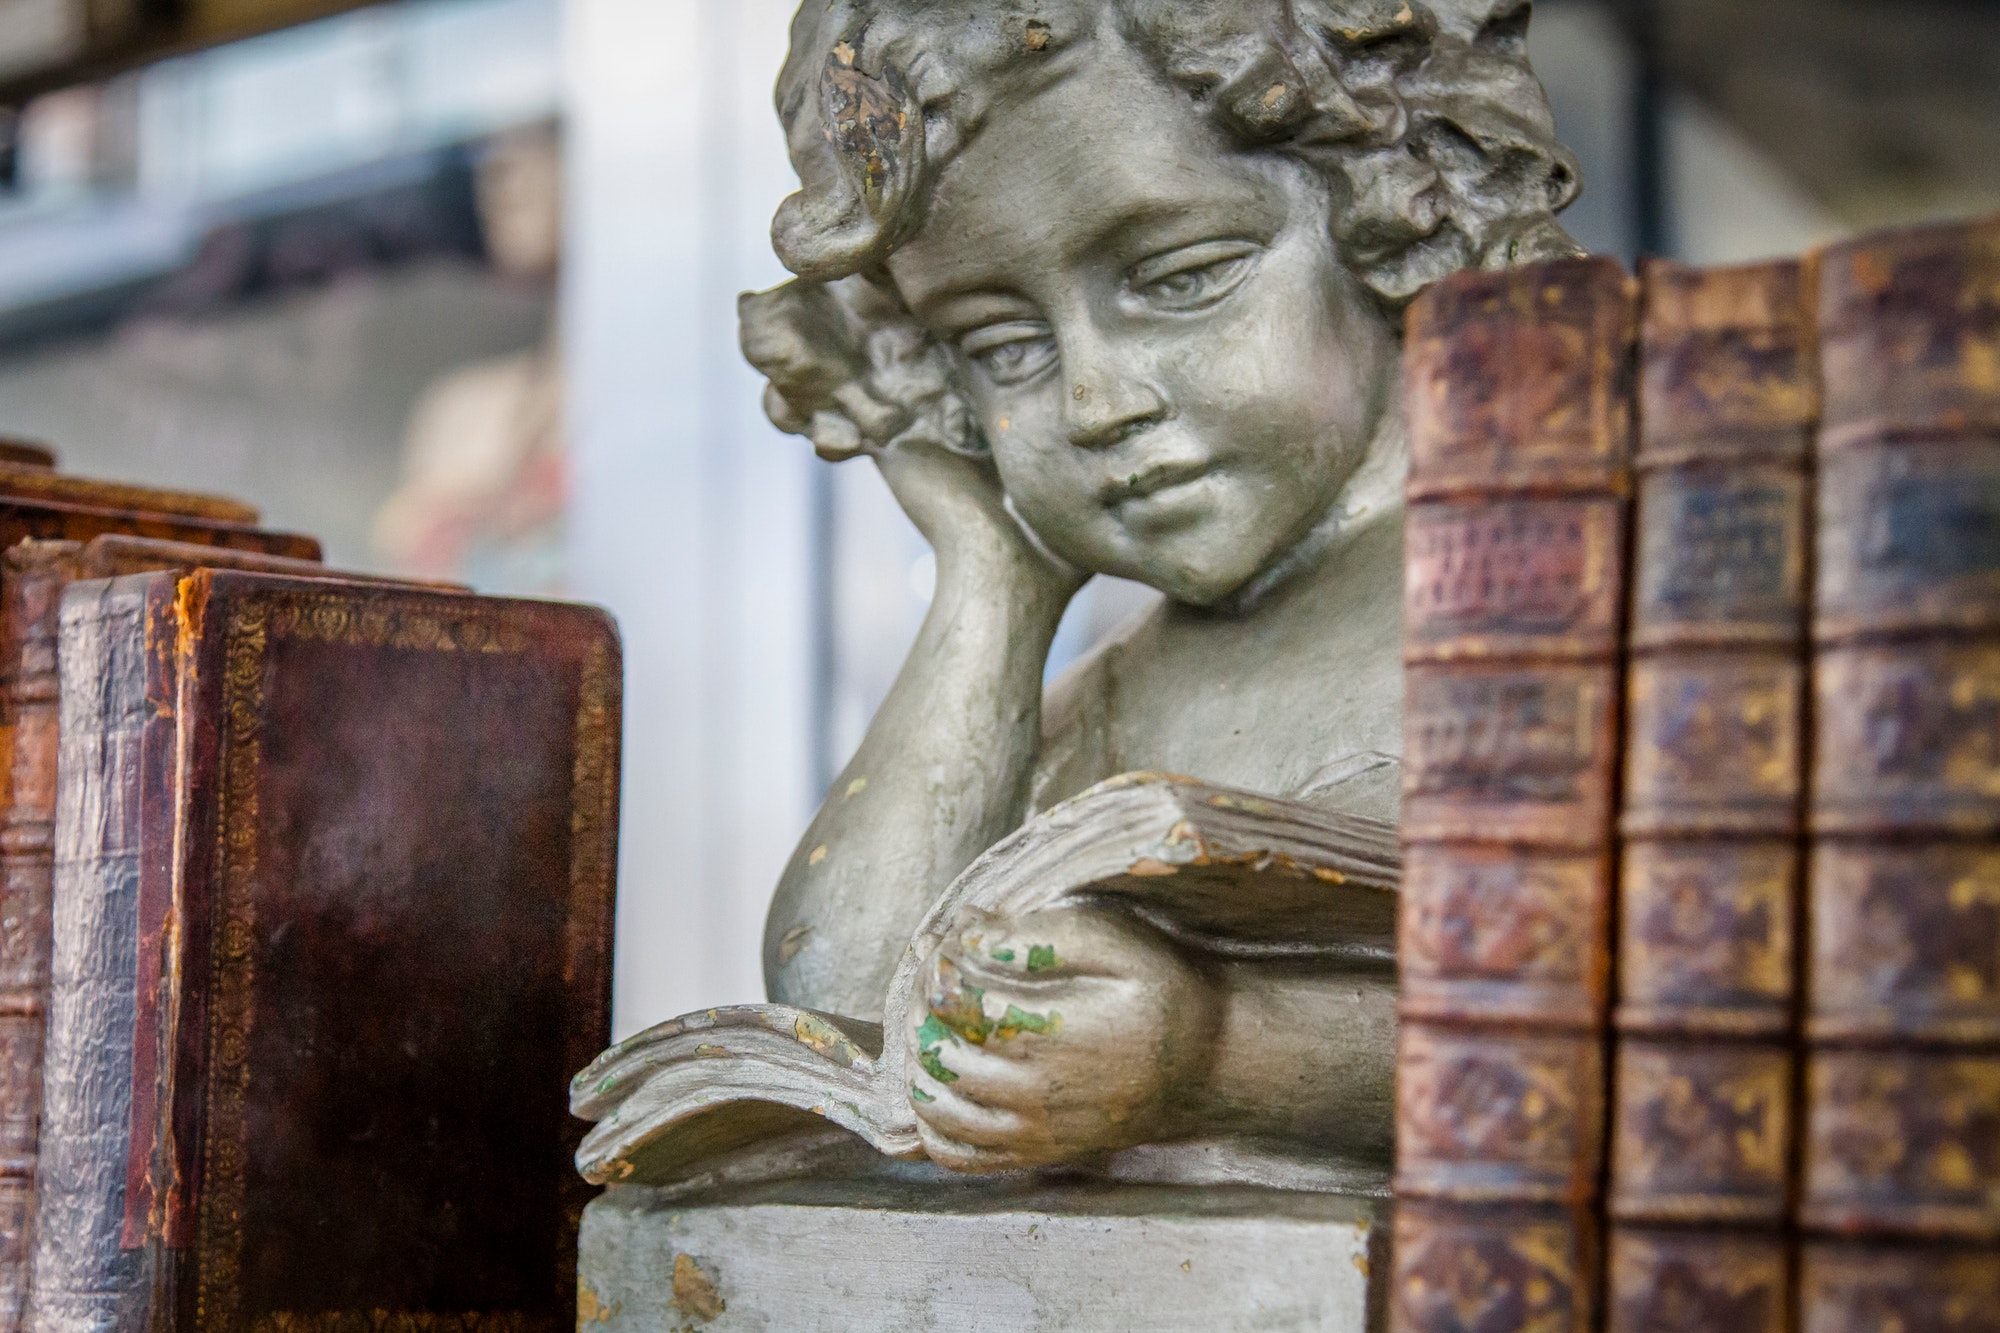 Angelic boy angel statue reading a book between a stack of old books, outside market for sale.